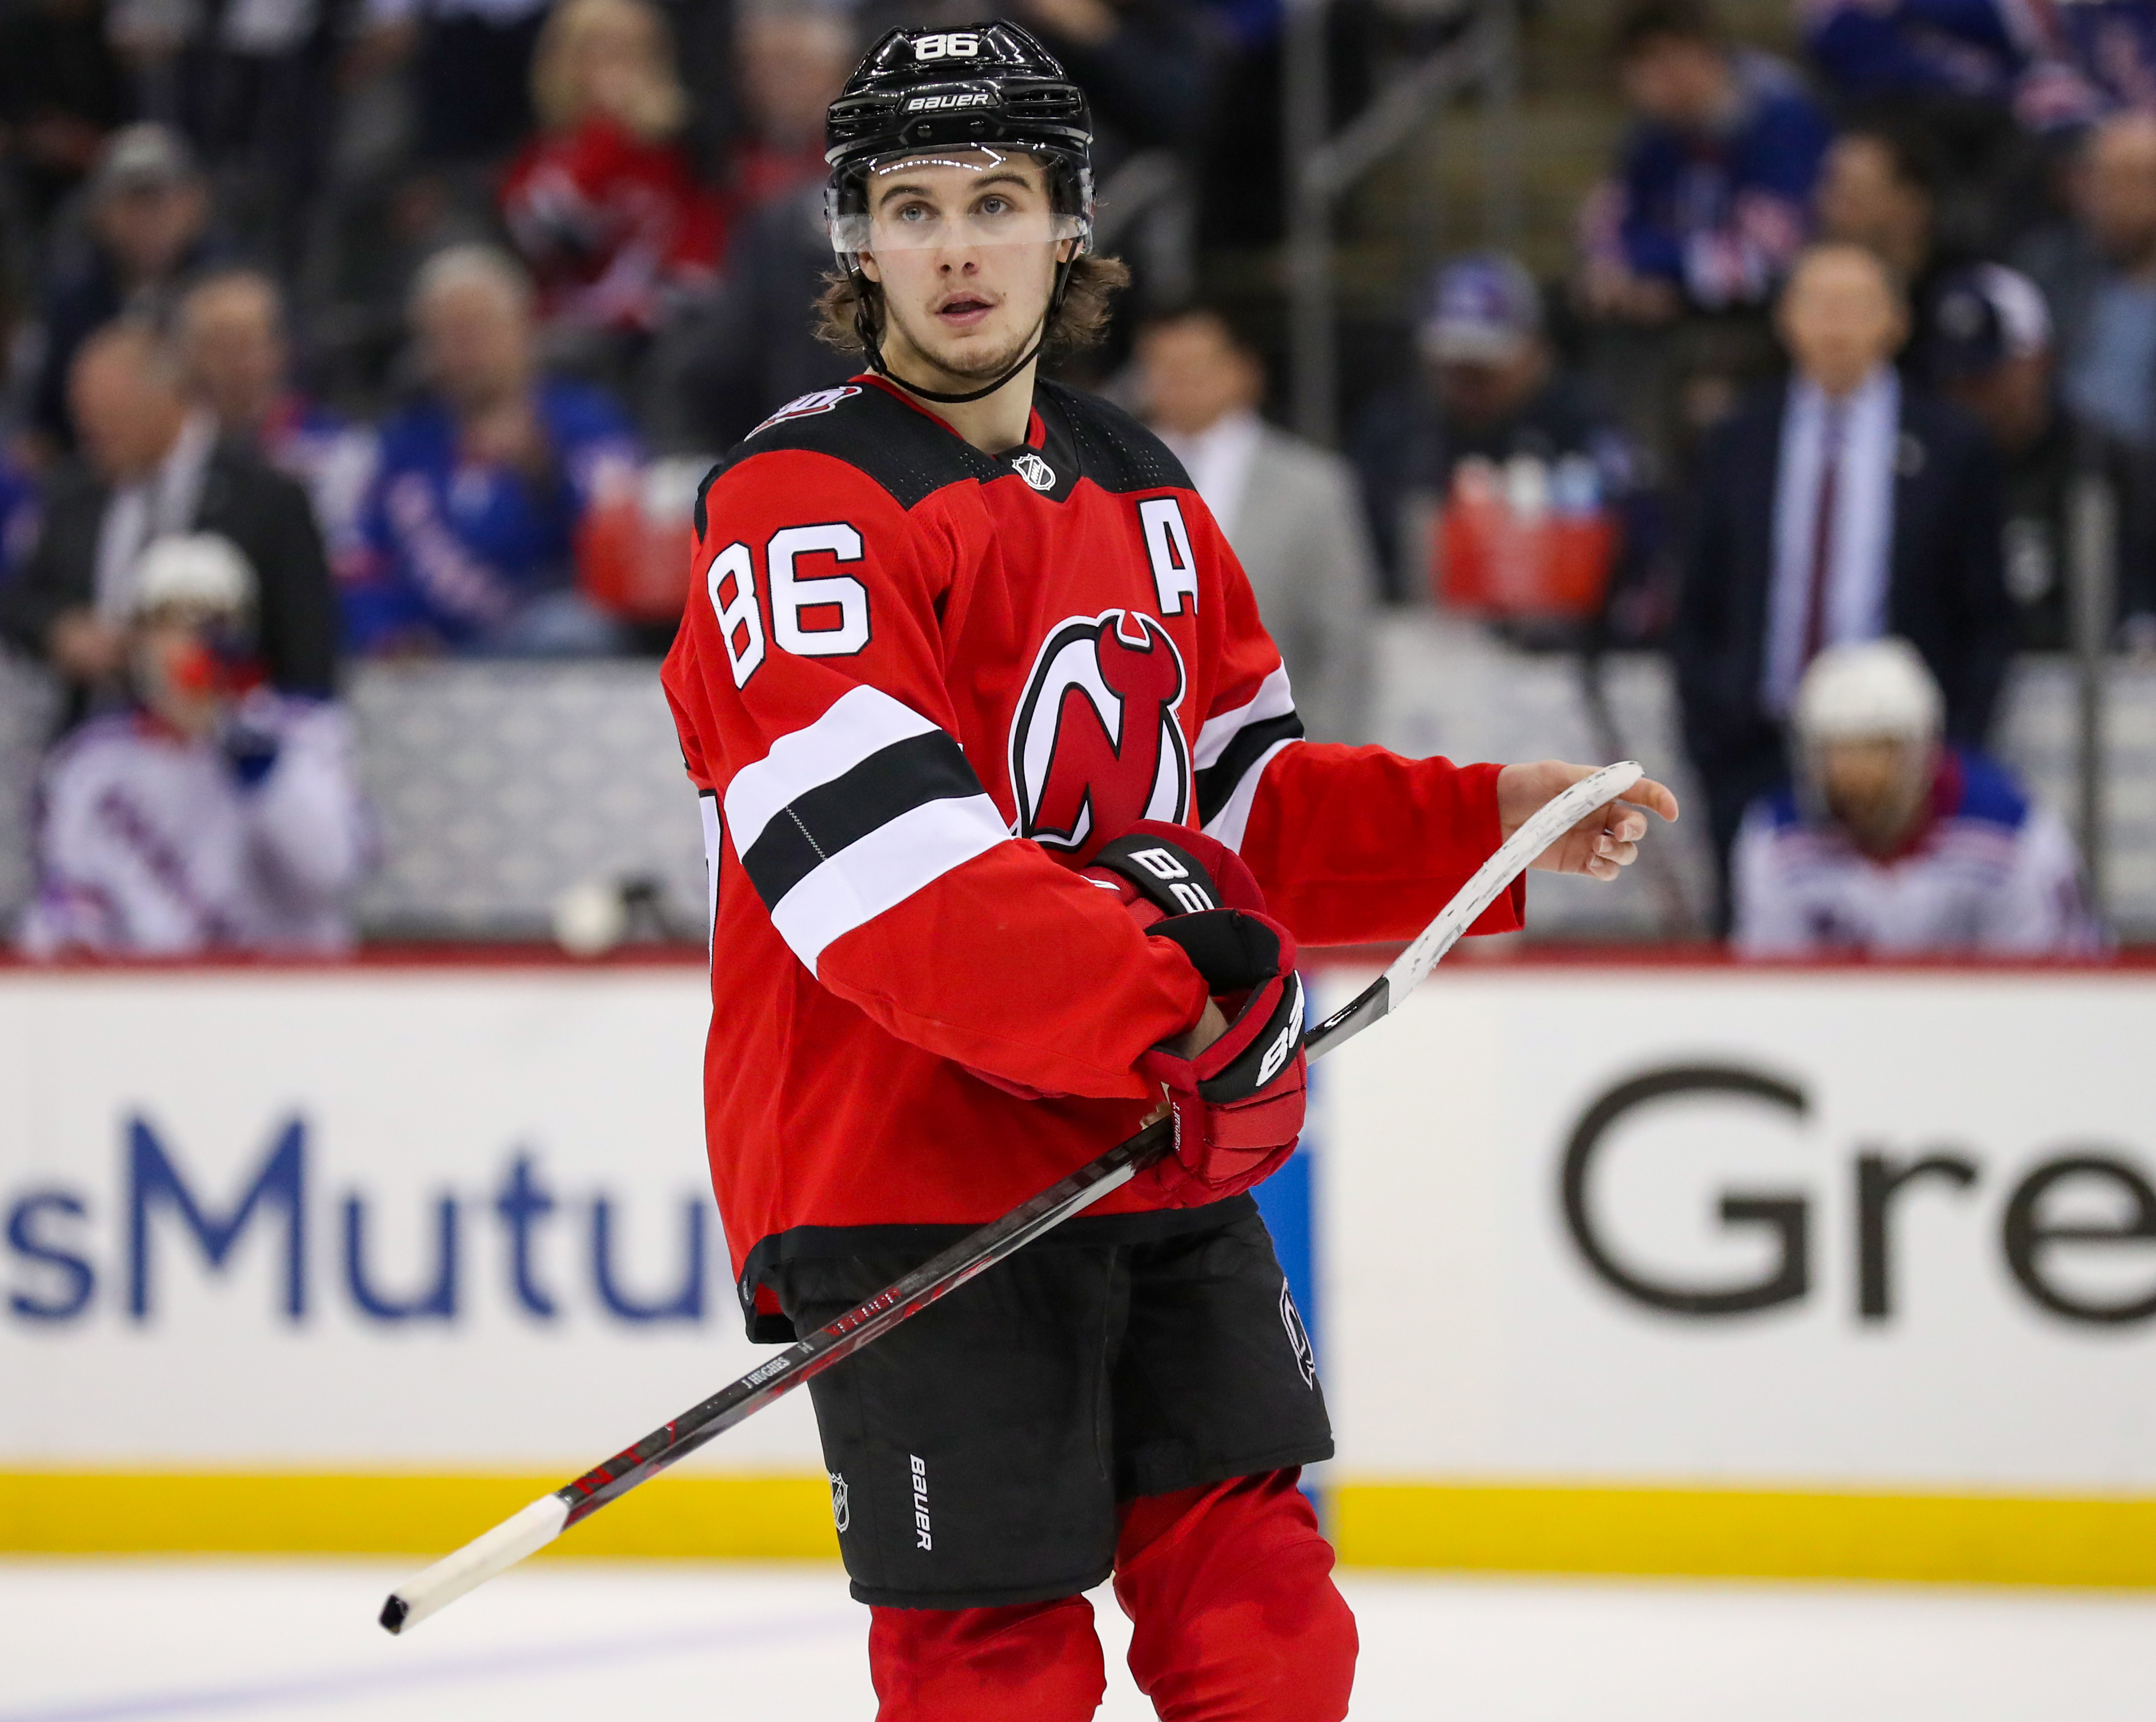 For Jack Hughes, a Devils playoff run is a chance to confirm his stardom